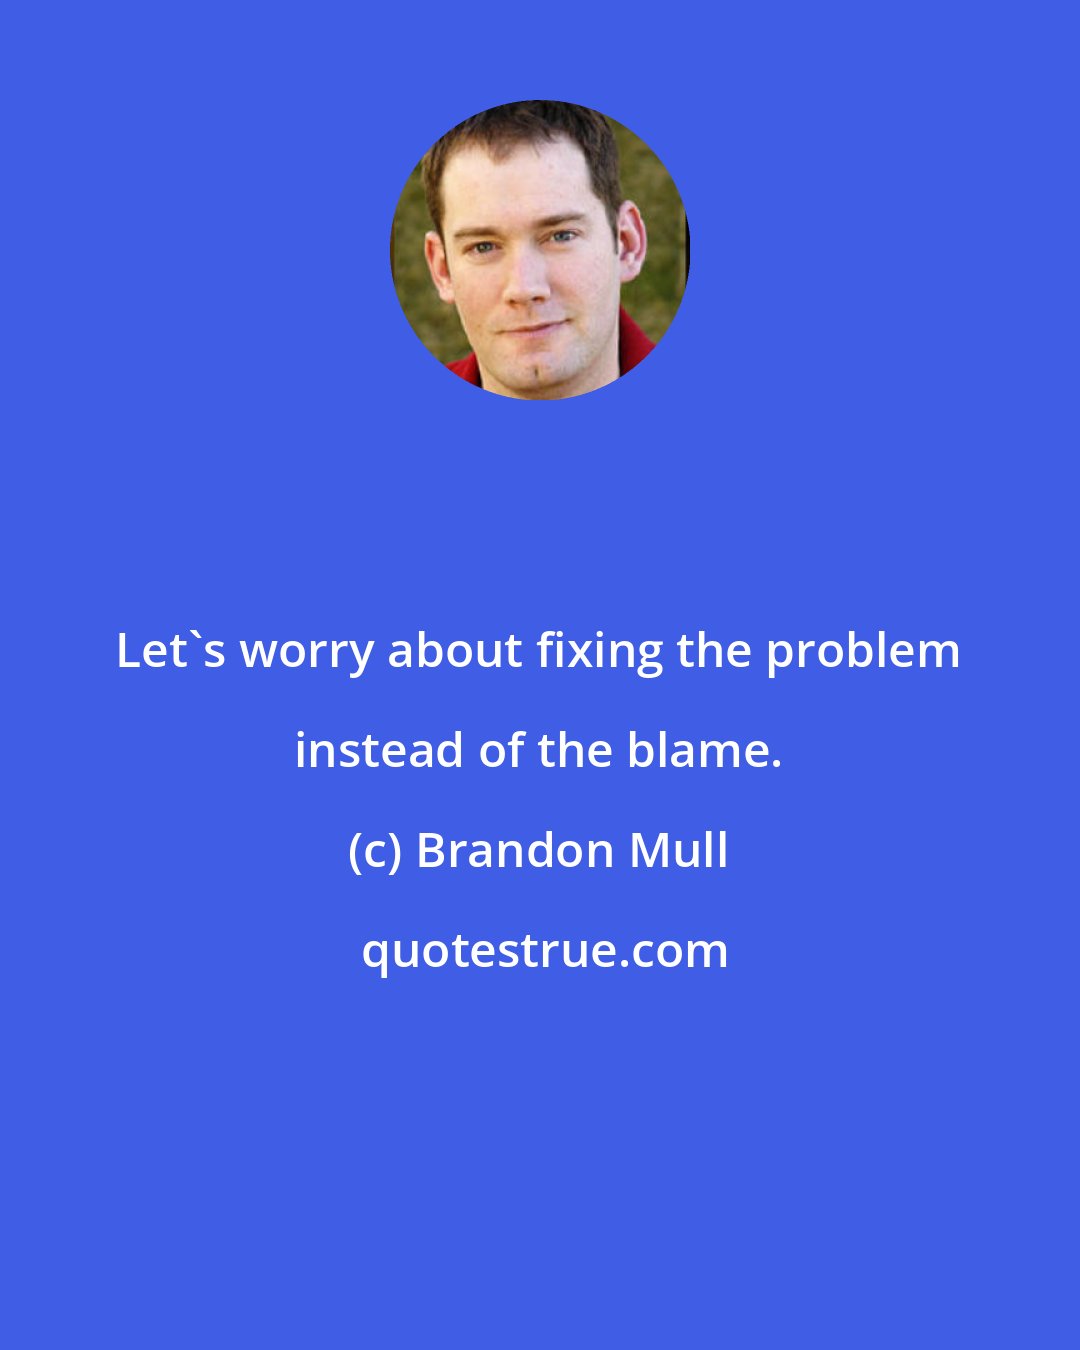 Brandon Mull: Let's worry about fixing the problem instead of the blame.